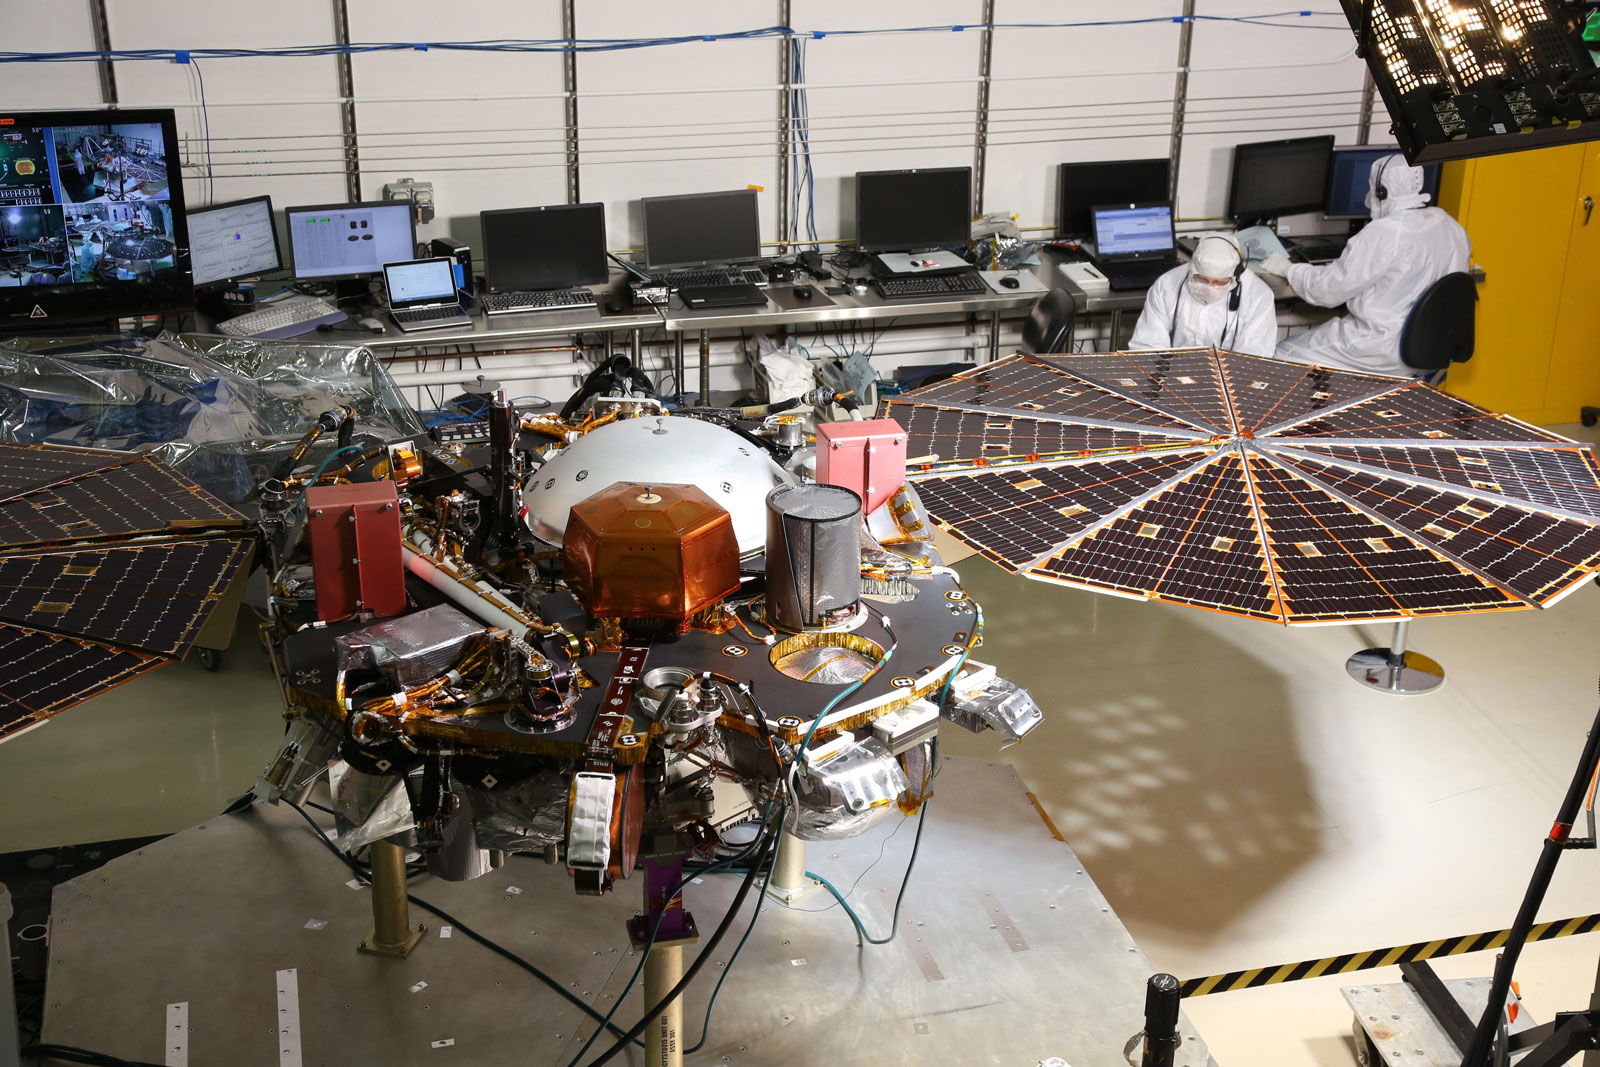 While in the landed configuration for the last time before arriving on Mars, NASA's InSight lander was commanded to deploy its solar arrays to test and verify the exact process that it will use on the surface of the Red Planet.